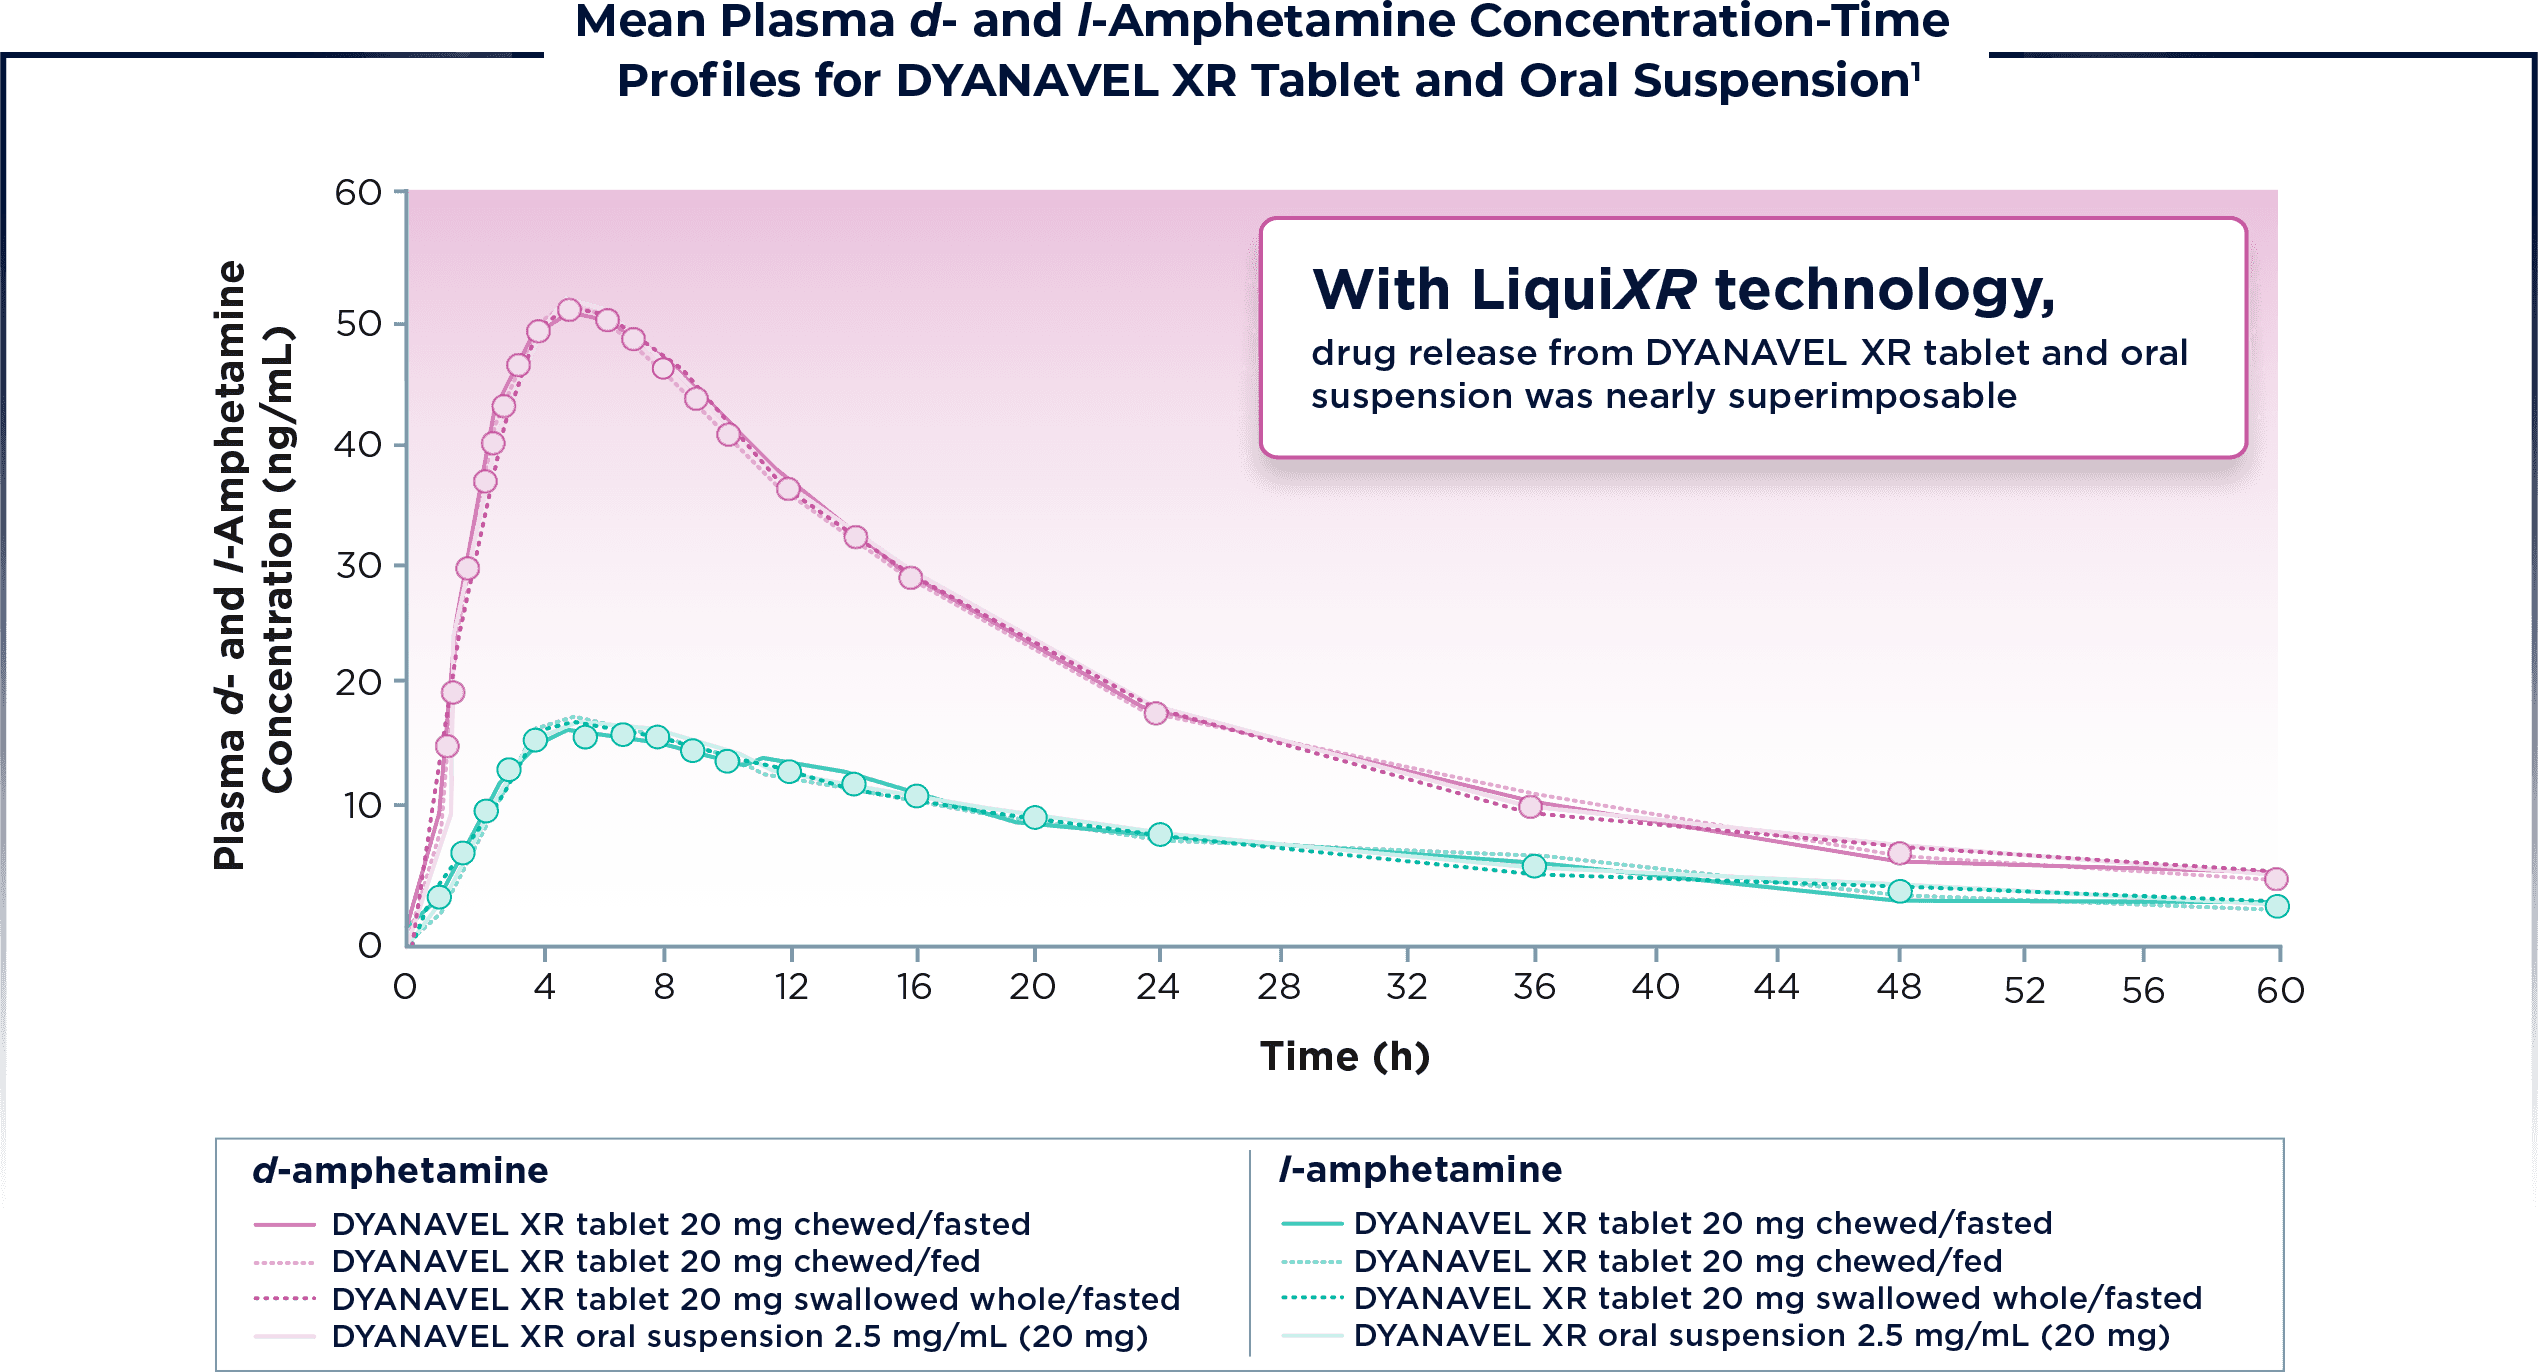 Graph: Mean Plasma d- and I-Amphetamine Concentration-Time Profiles For DYANAVEL XR Tablet and Oral Suspension